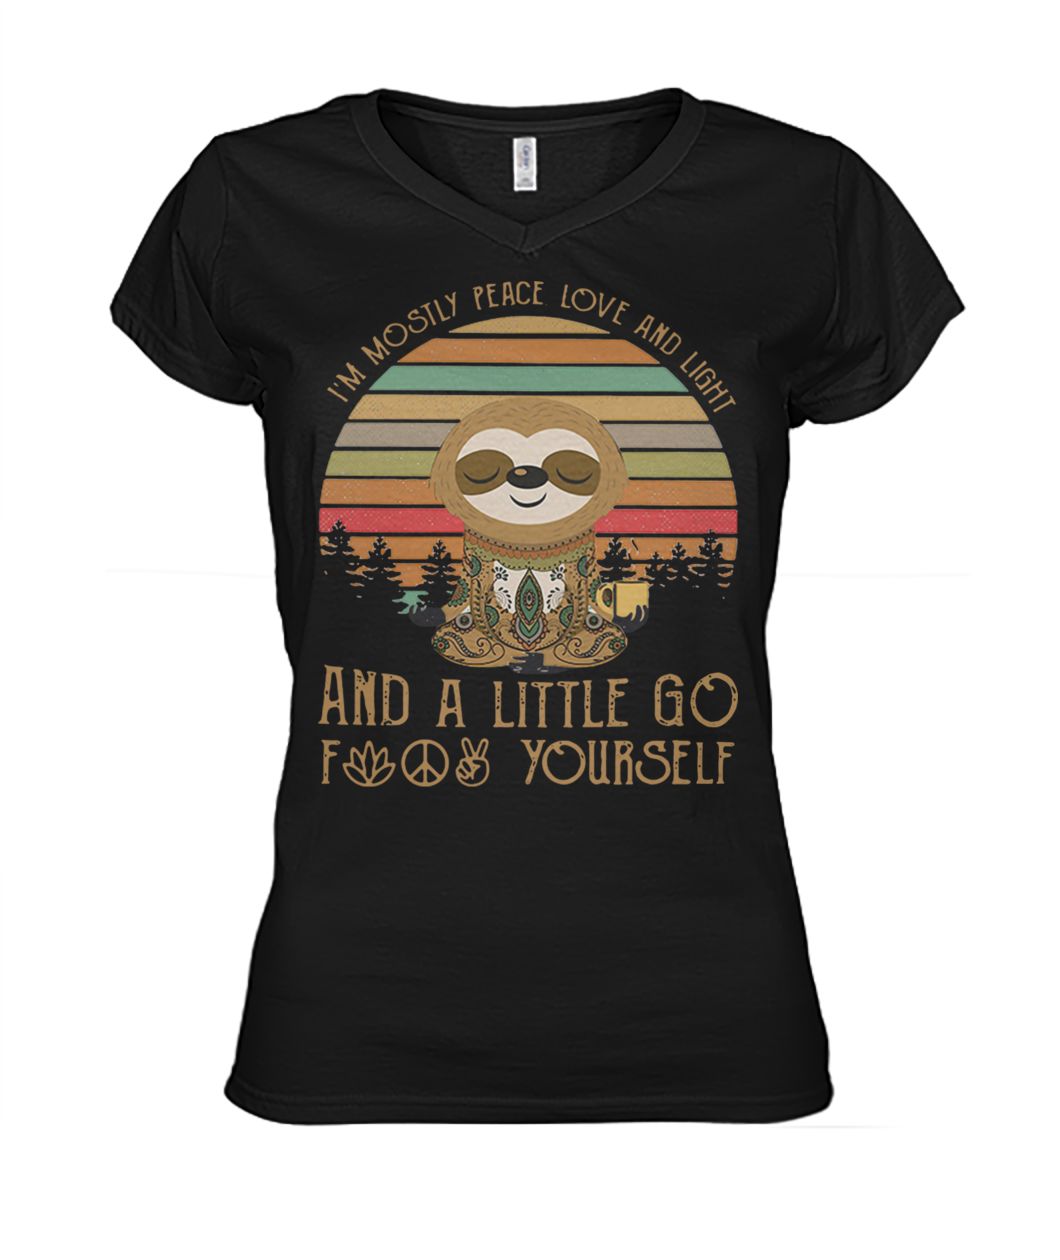 Sloth I’m mostly peace love and light and a little go fuck yourself vintage women's v-neck